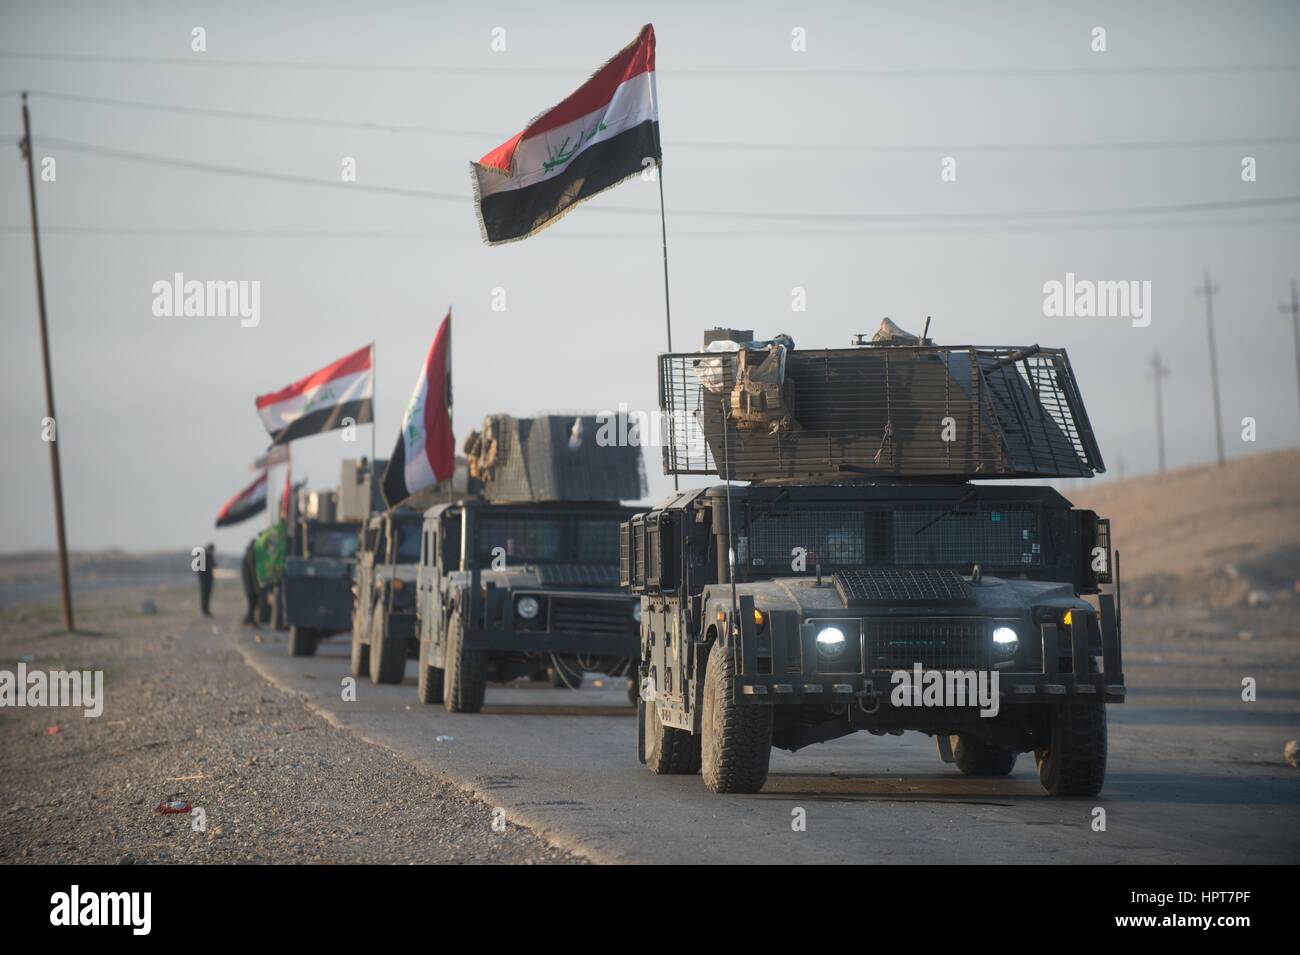 Mosul, Iraq. 23rd Feb, 2017. An Iraqi Special Forces convoy heads to the frontline as the Iraq government continues to capture territory from ISIS February 23, 2017 in Mosul, Iraq. Iraqi forces moved into western Mosul taking full control of the international airport on the southwestern edge of the city. Credit: Planetpix/Alamy Live News Stock Photo